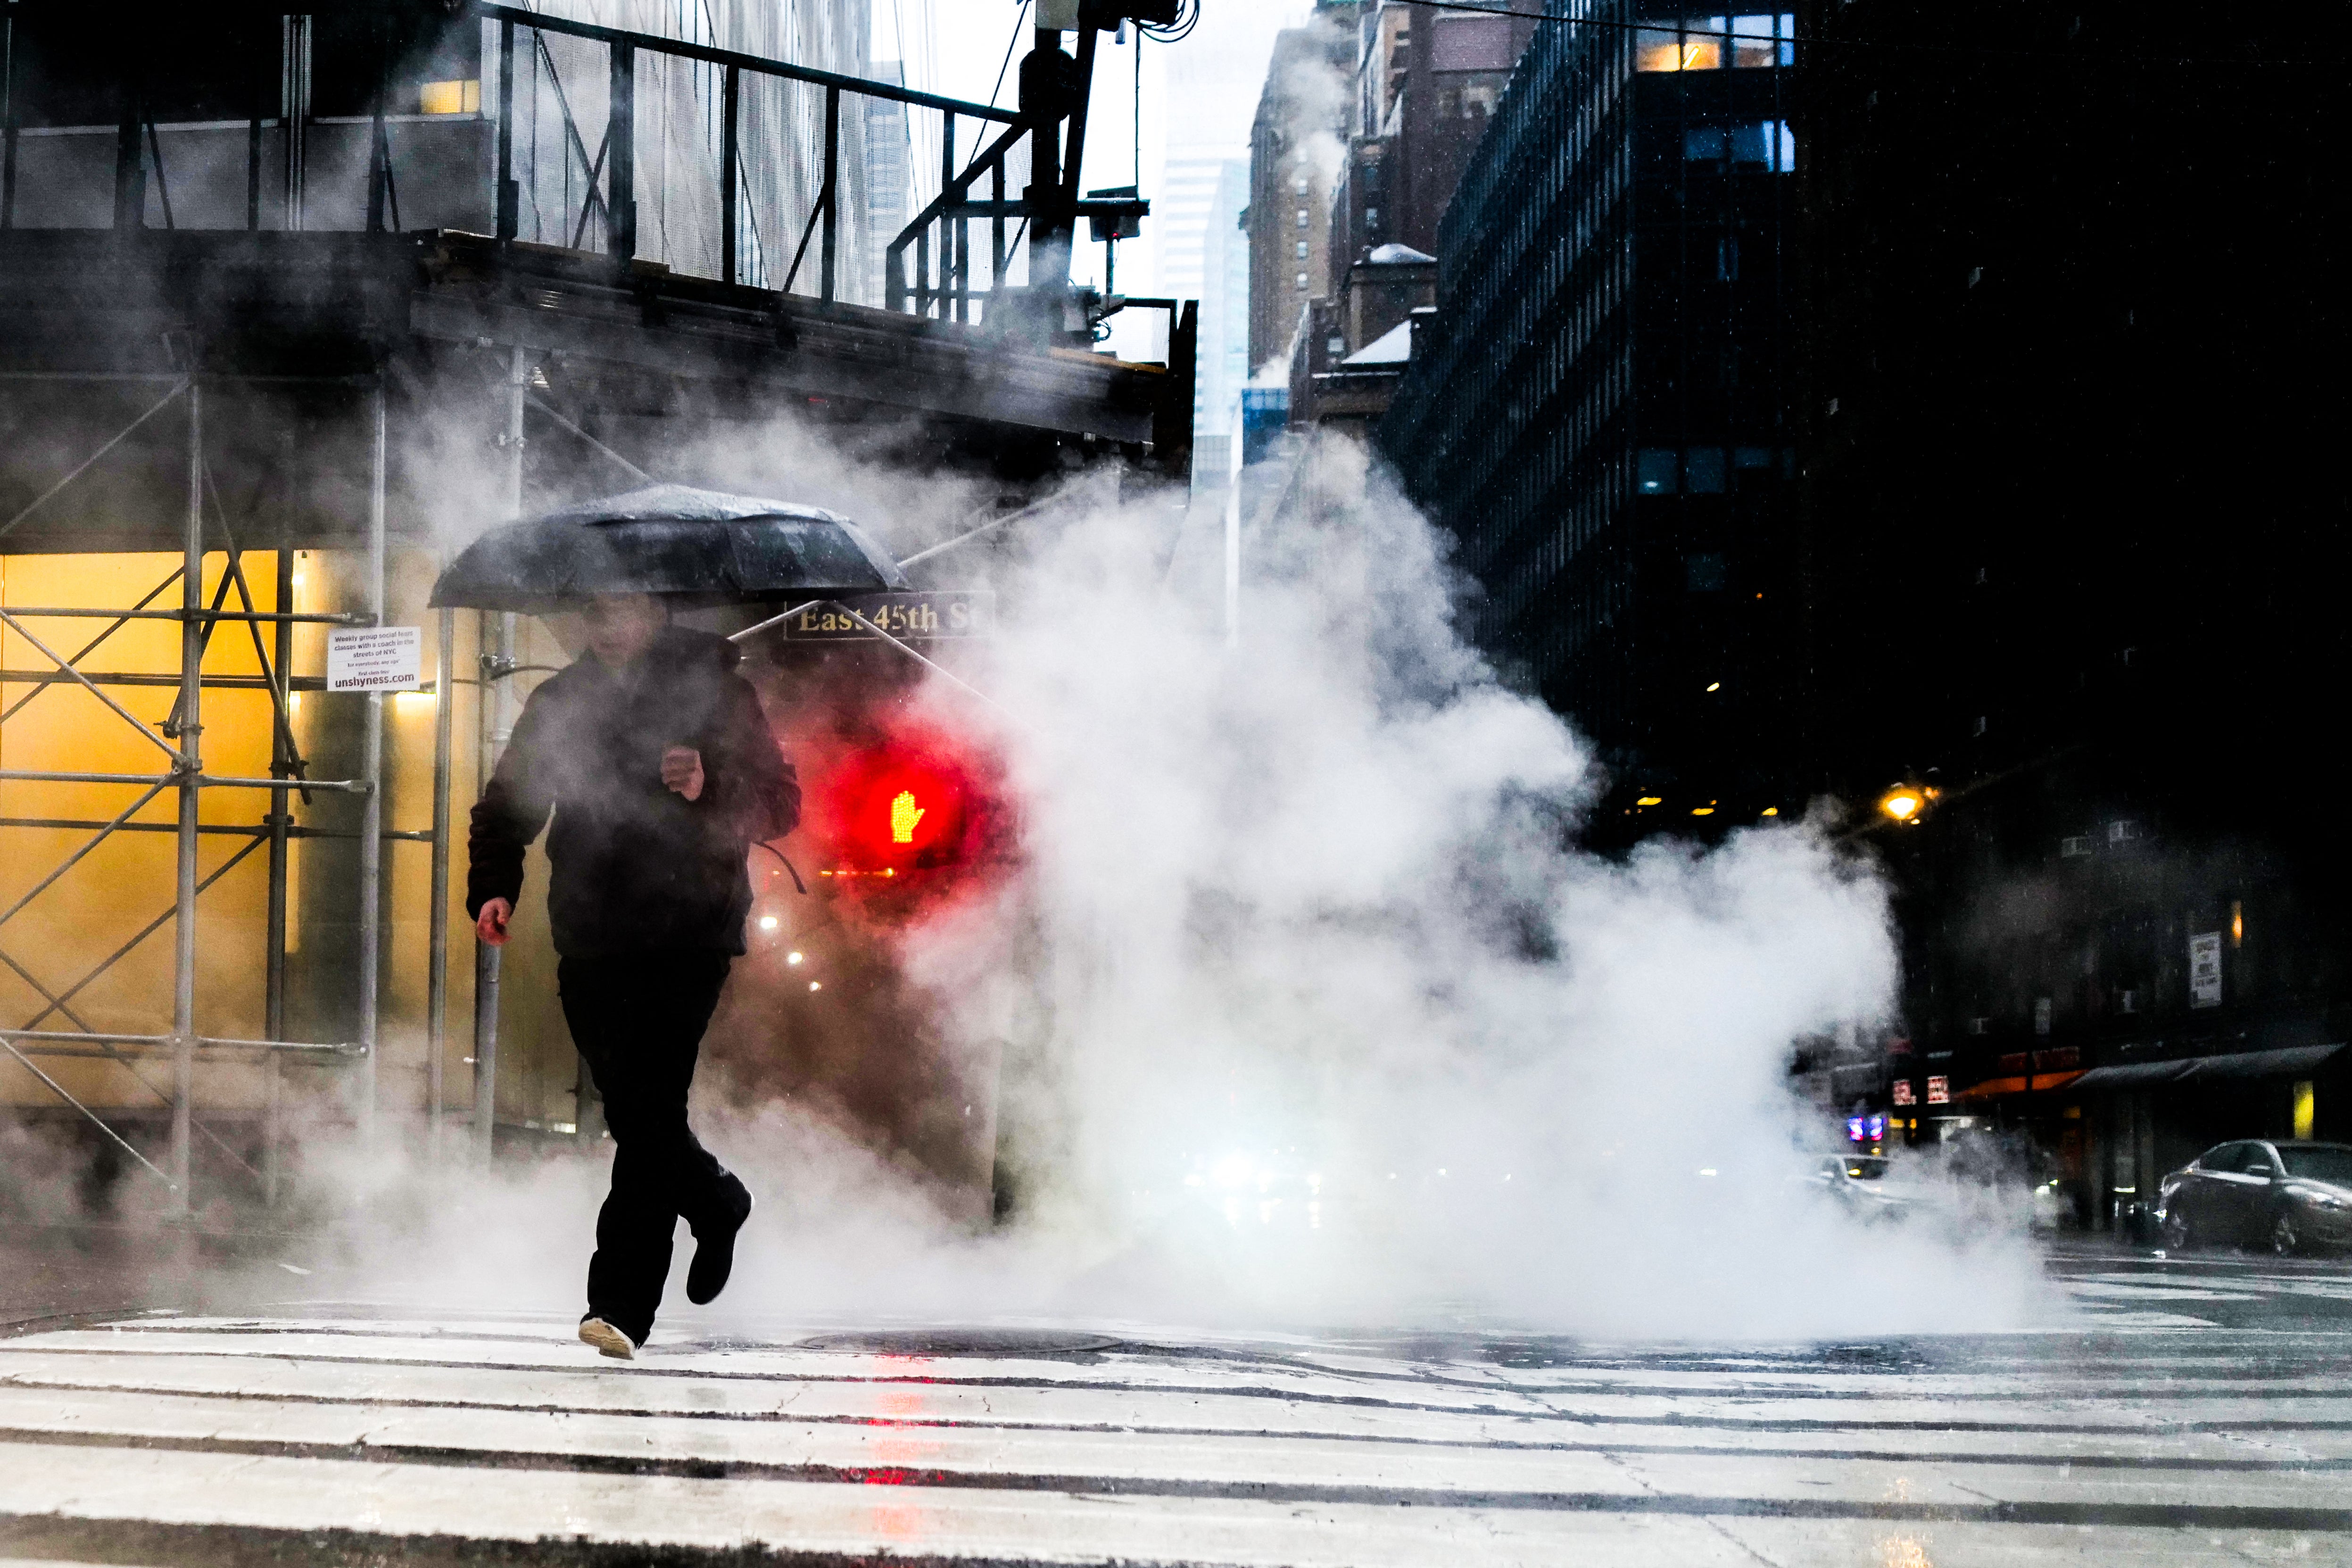 A man crosses a street during heavy rain in the Manhattan borough of New York on March 23